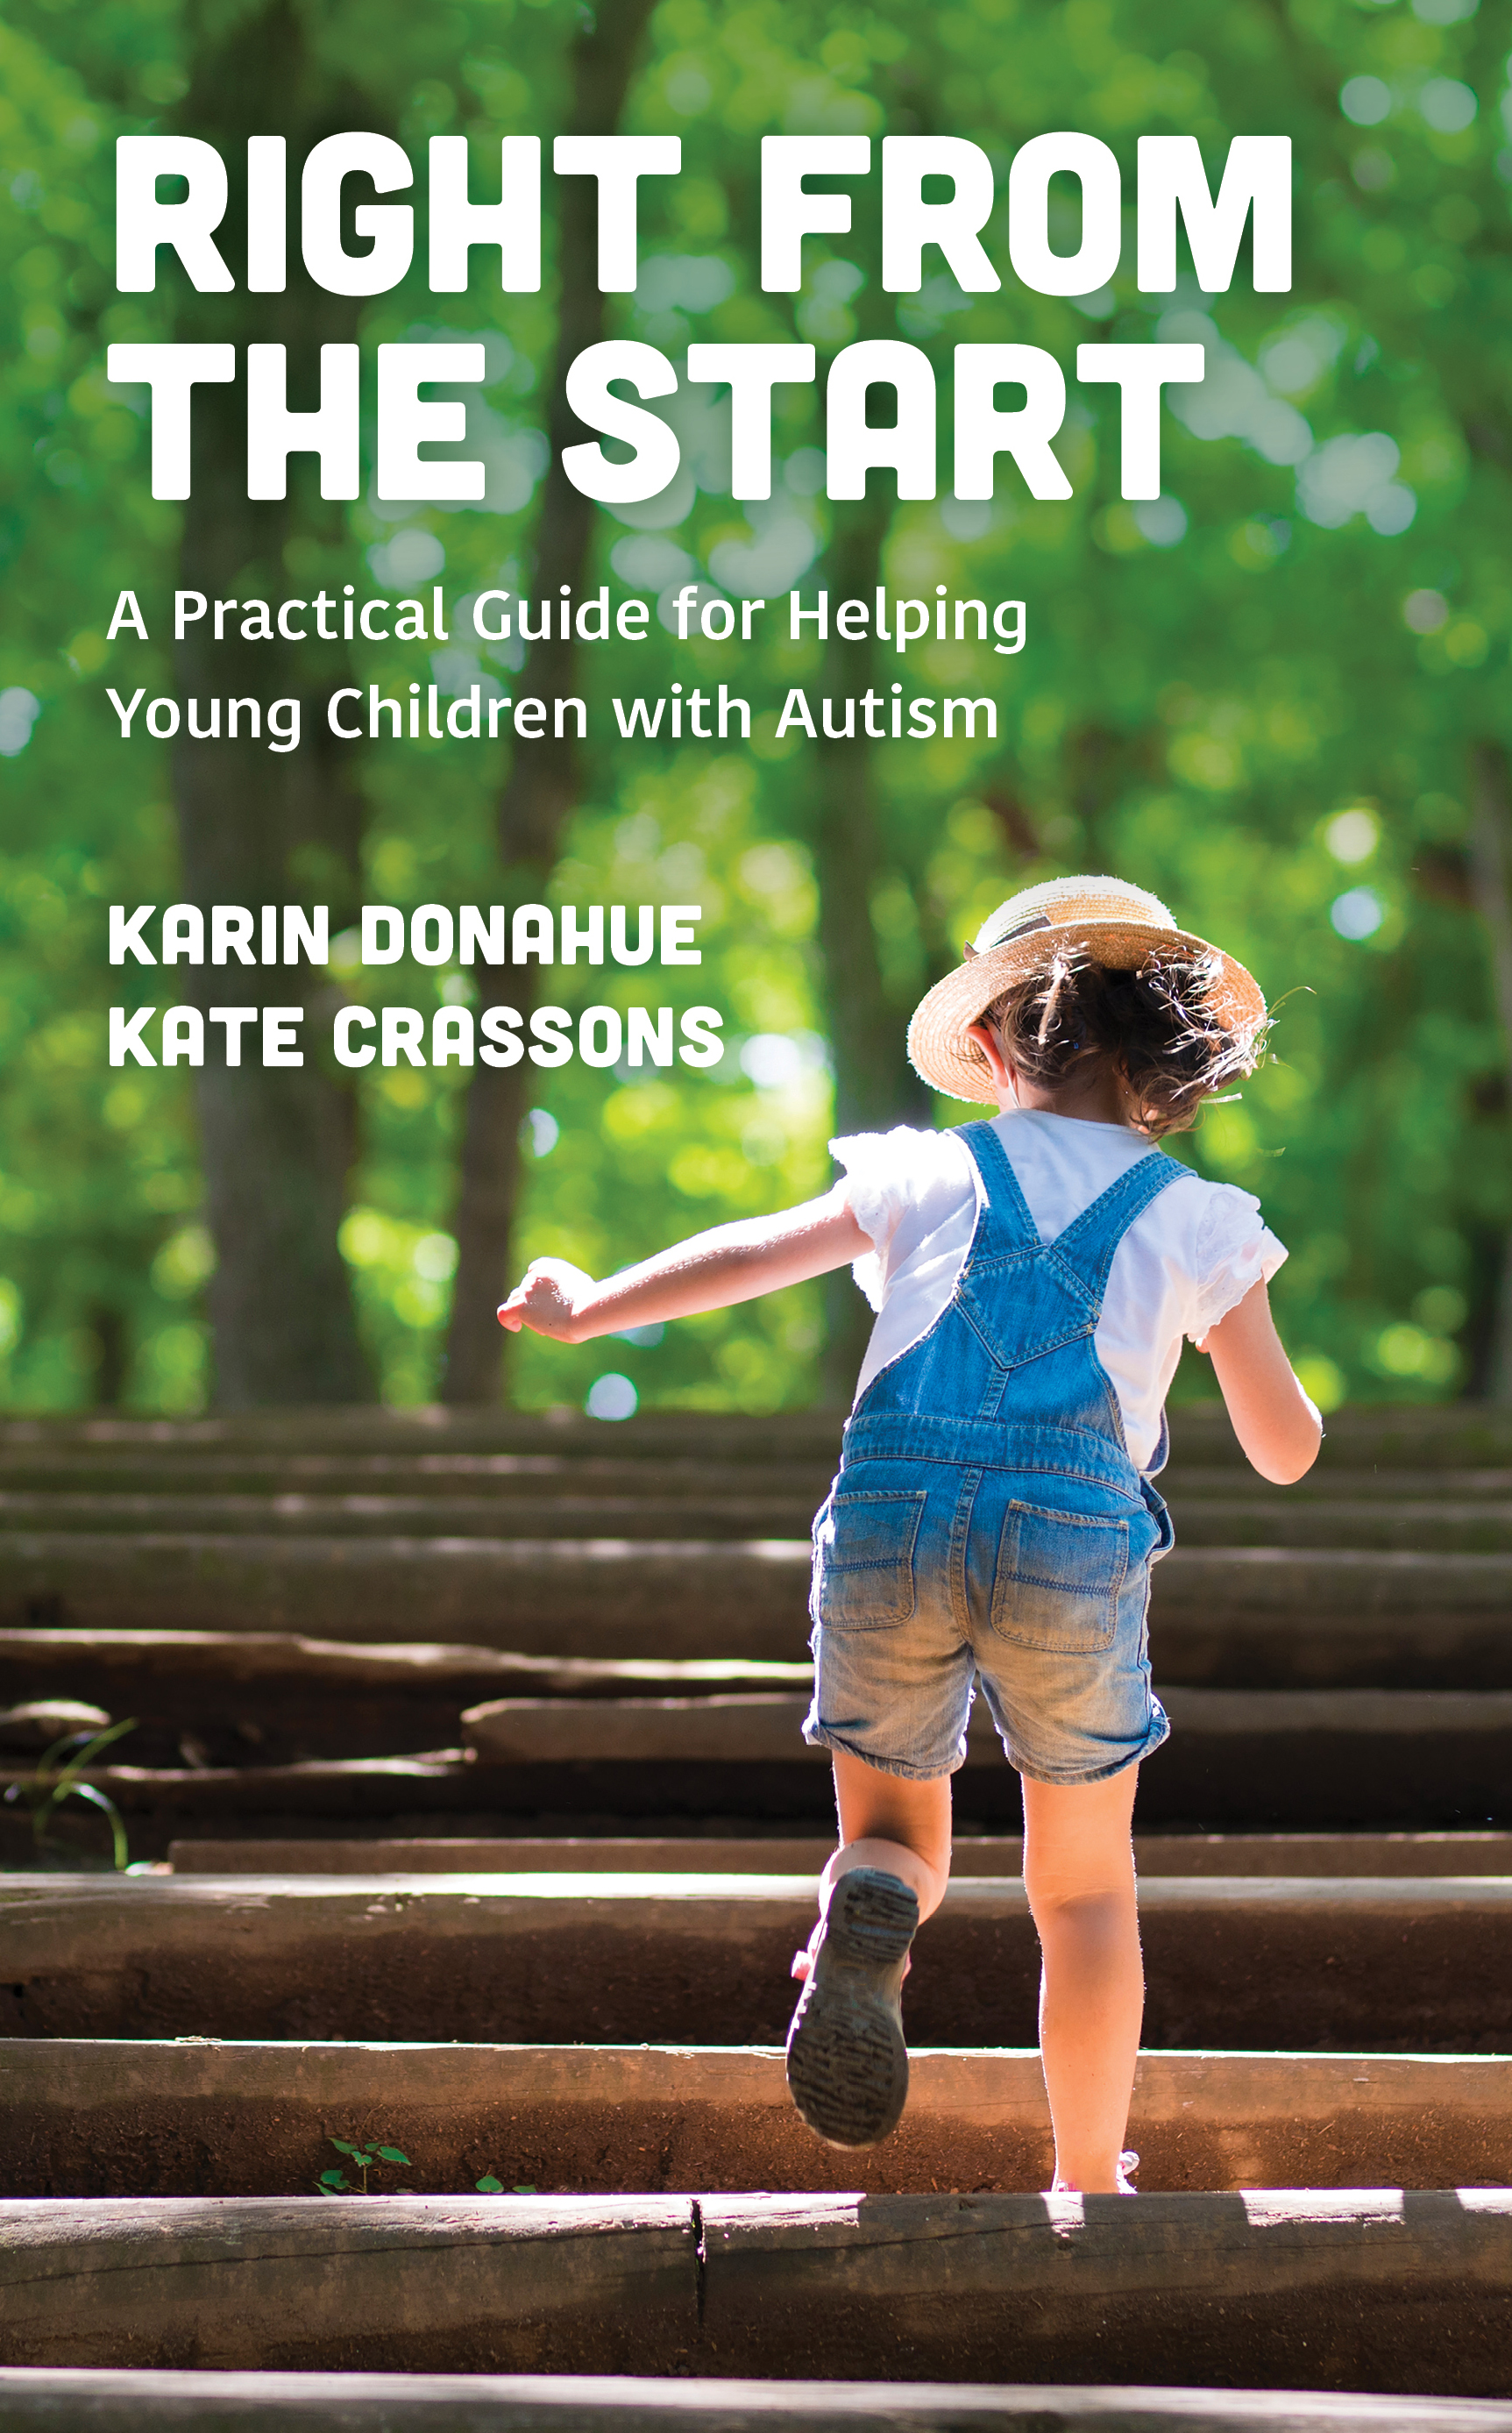 Right from the Start: A Practical Guide for Helping Young Children with Autism